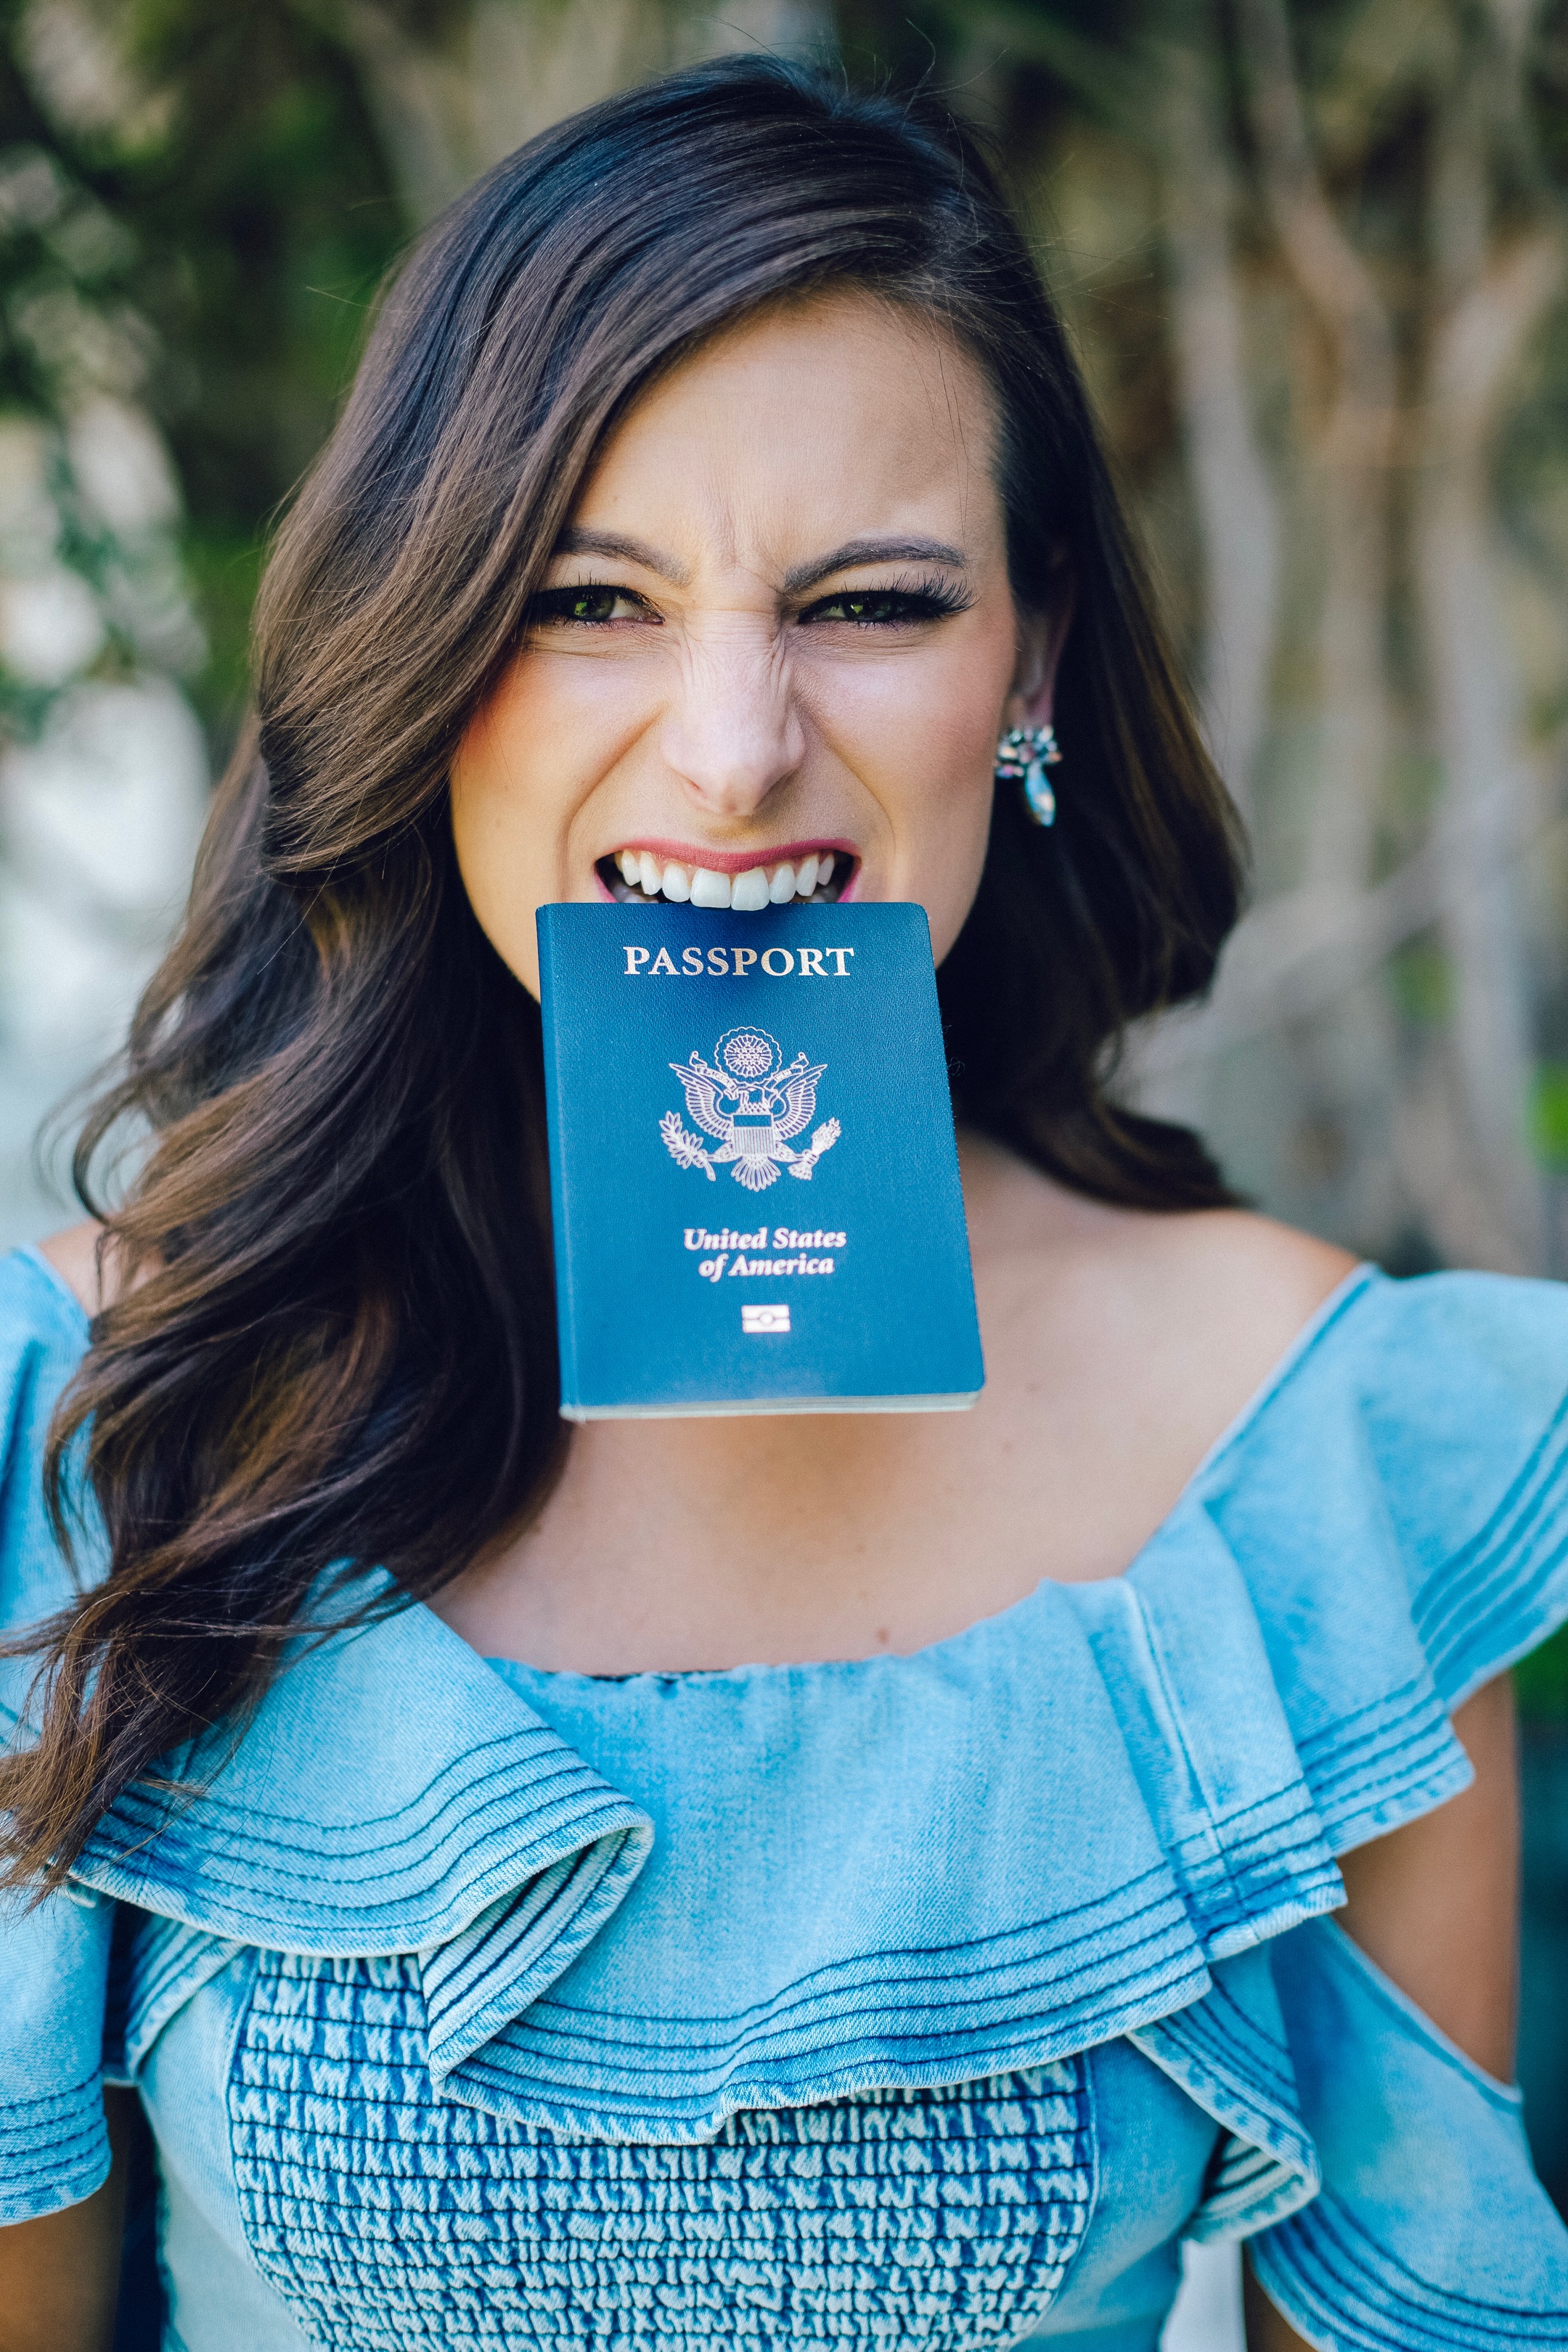 What is Global Entry and How Do You Apply For It? - AFAR